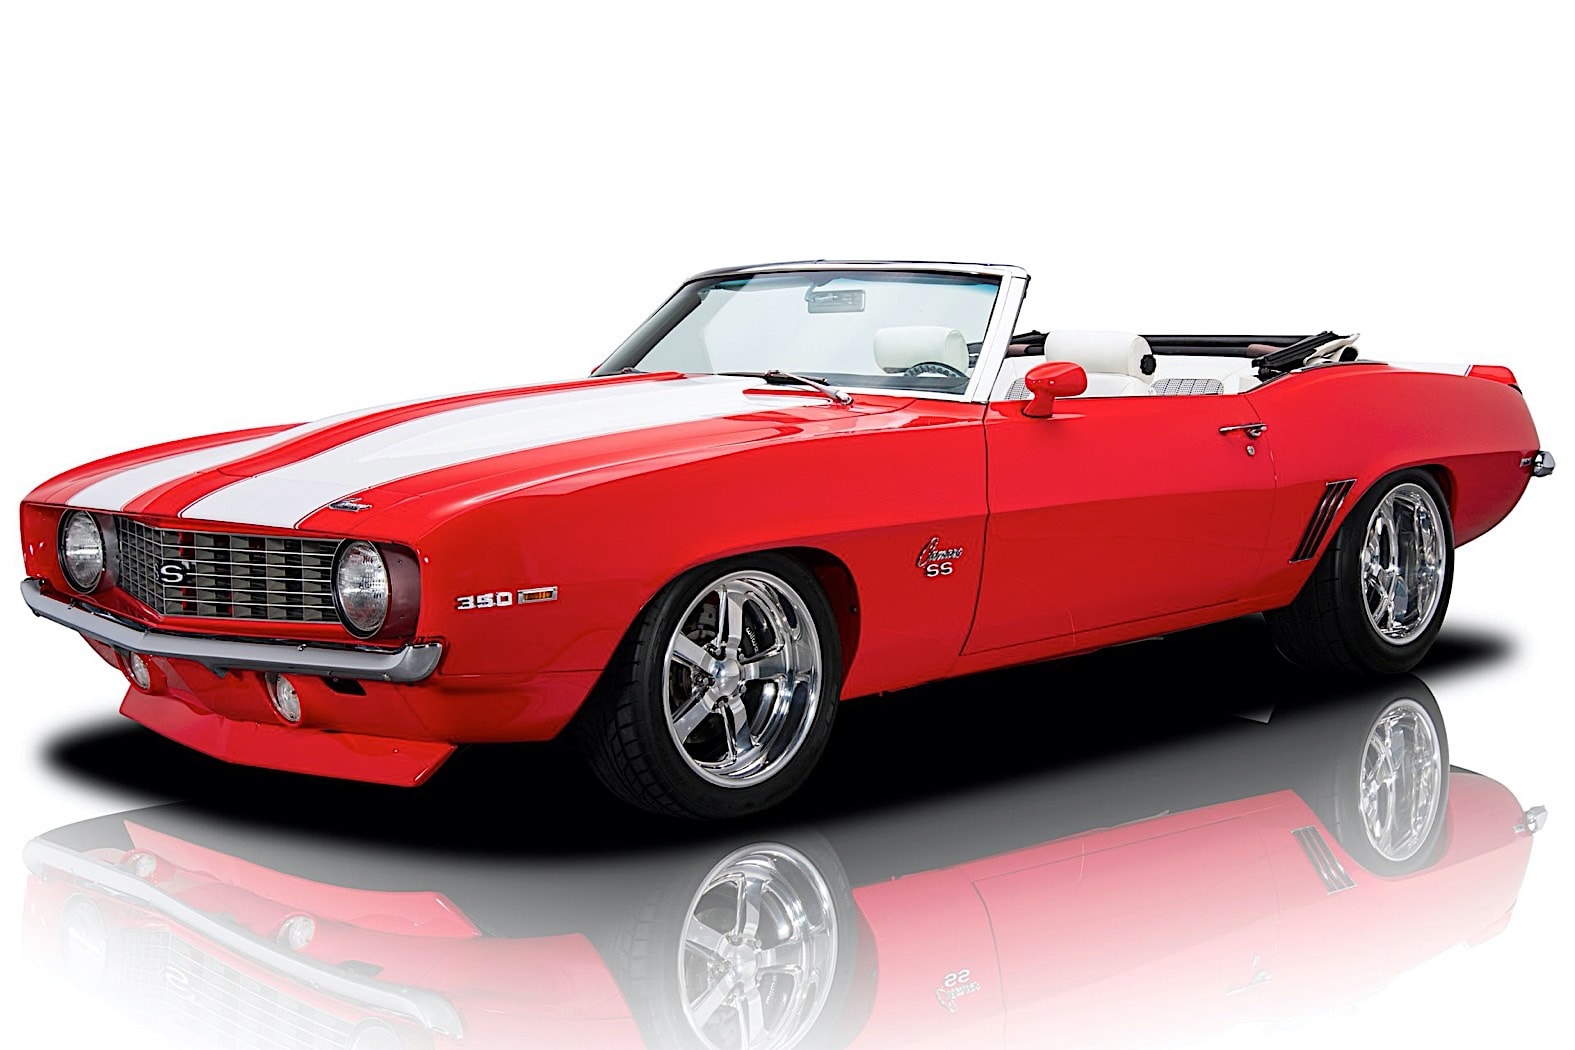 Viper Red 1969 Chevy Camaro SS Packing 400 LS1 Is Sweet Treat of the Day - autoevolution